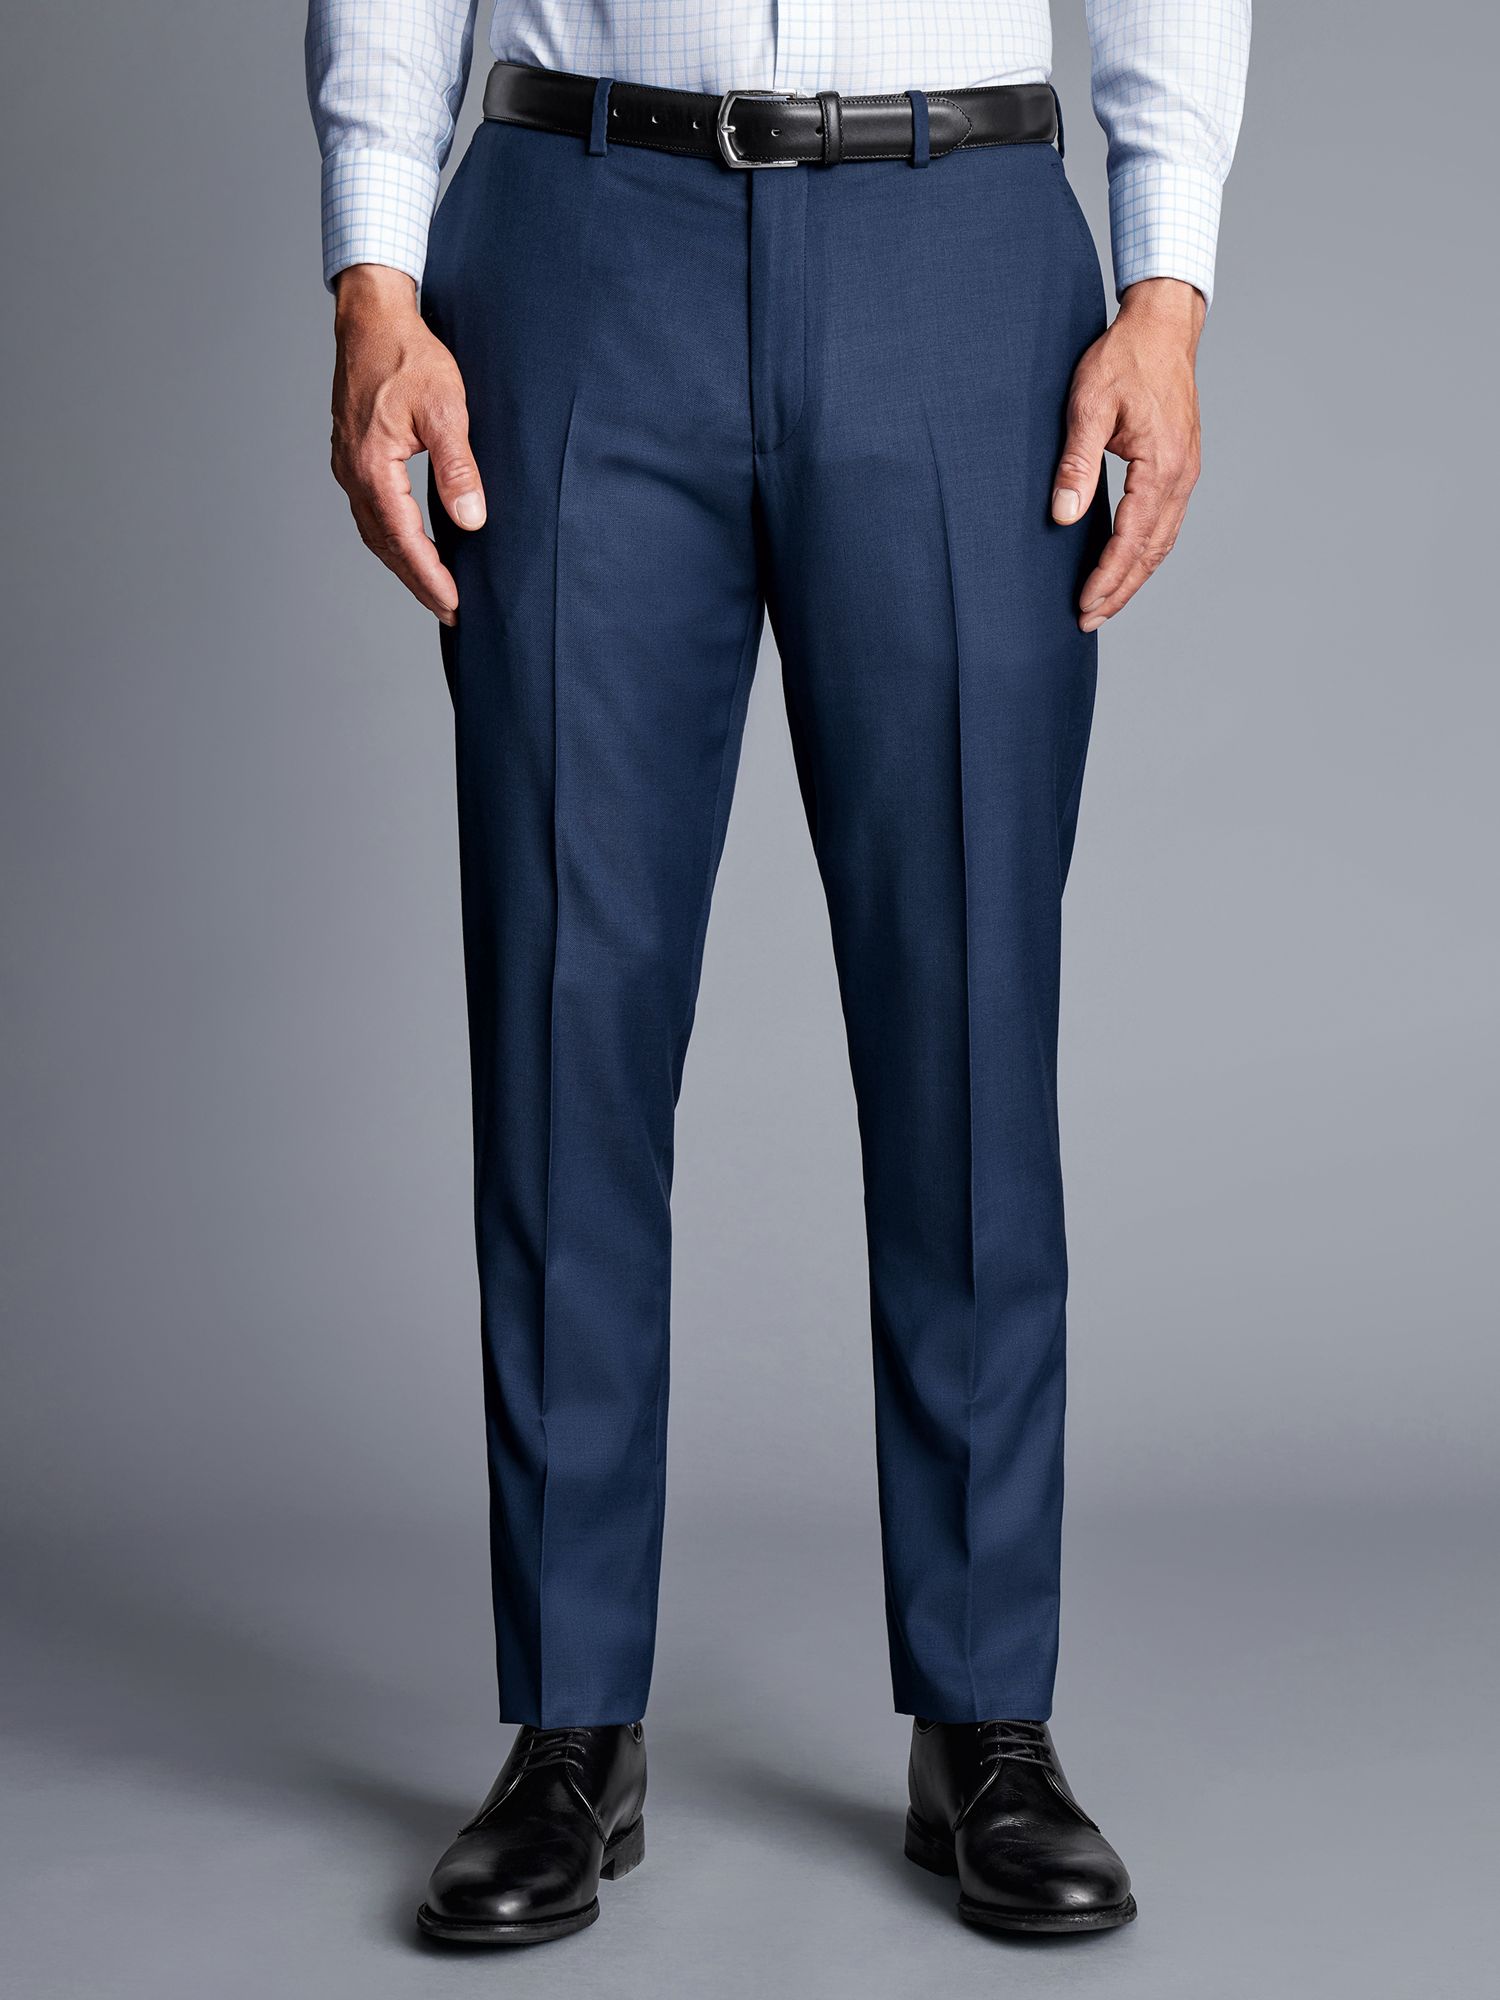 Charles Tyrwhitt Natural Stretch Twill Classic Fit Suit Trousers, Royal ...